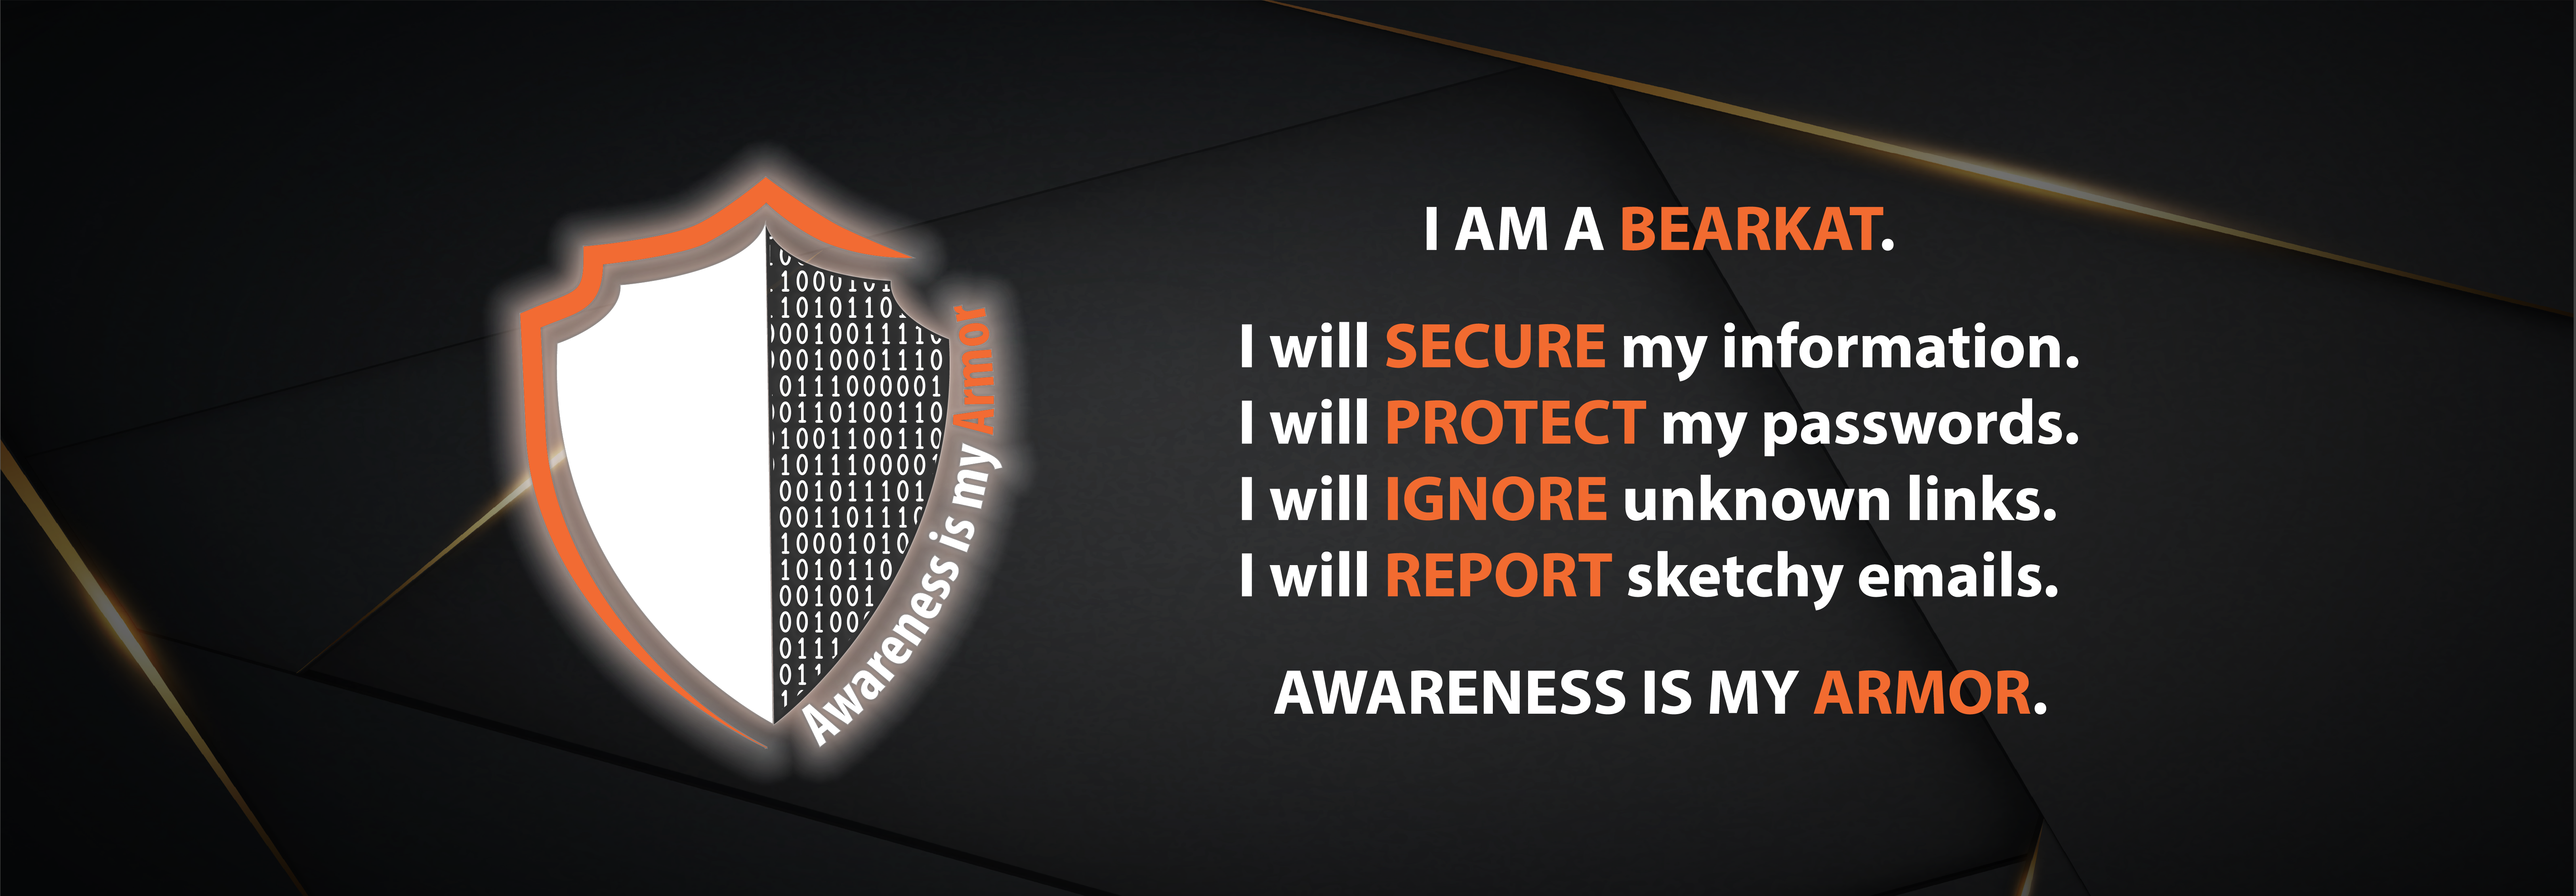 Shield and Cybersecurity Creed: I AM A BEARKAT. I will SECURE my information. I will PROTECT my passwords. I will IGNORE unknown links. I will REPORT sketchy emails. AWARENESS IS MY ARMOR.